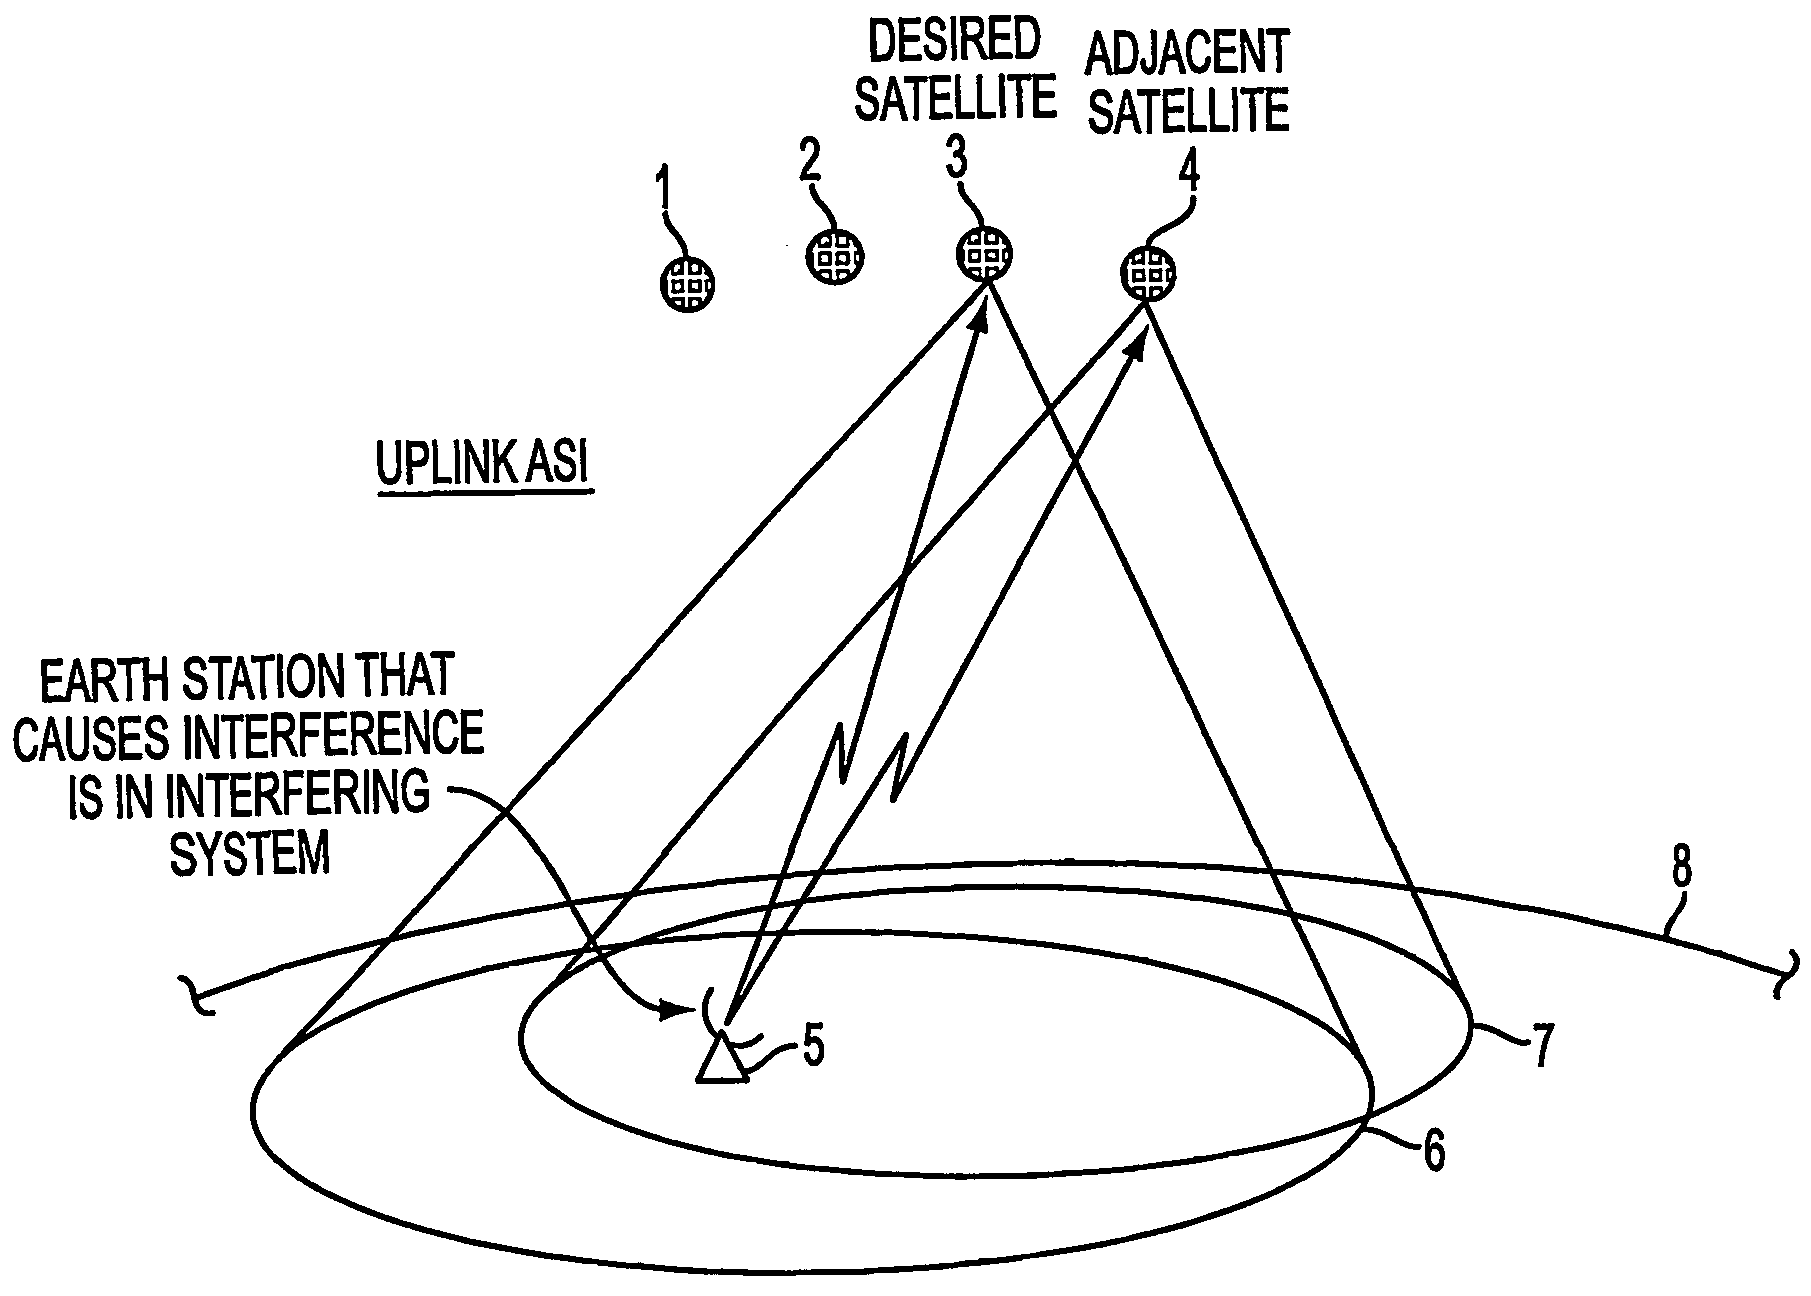 Method and apparatus for measuring adjacent satellite interference